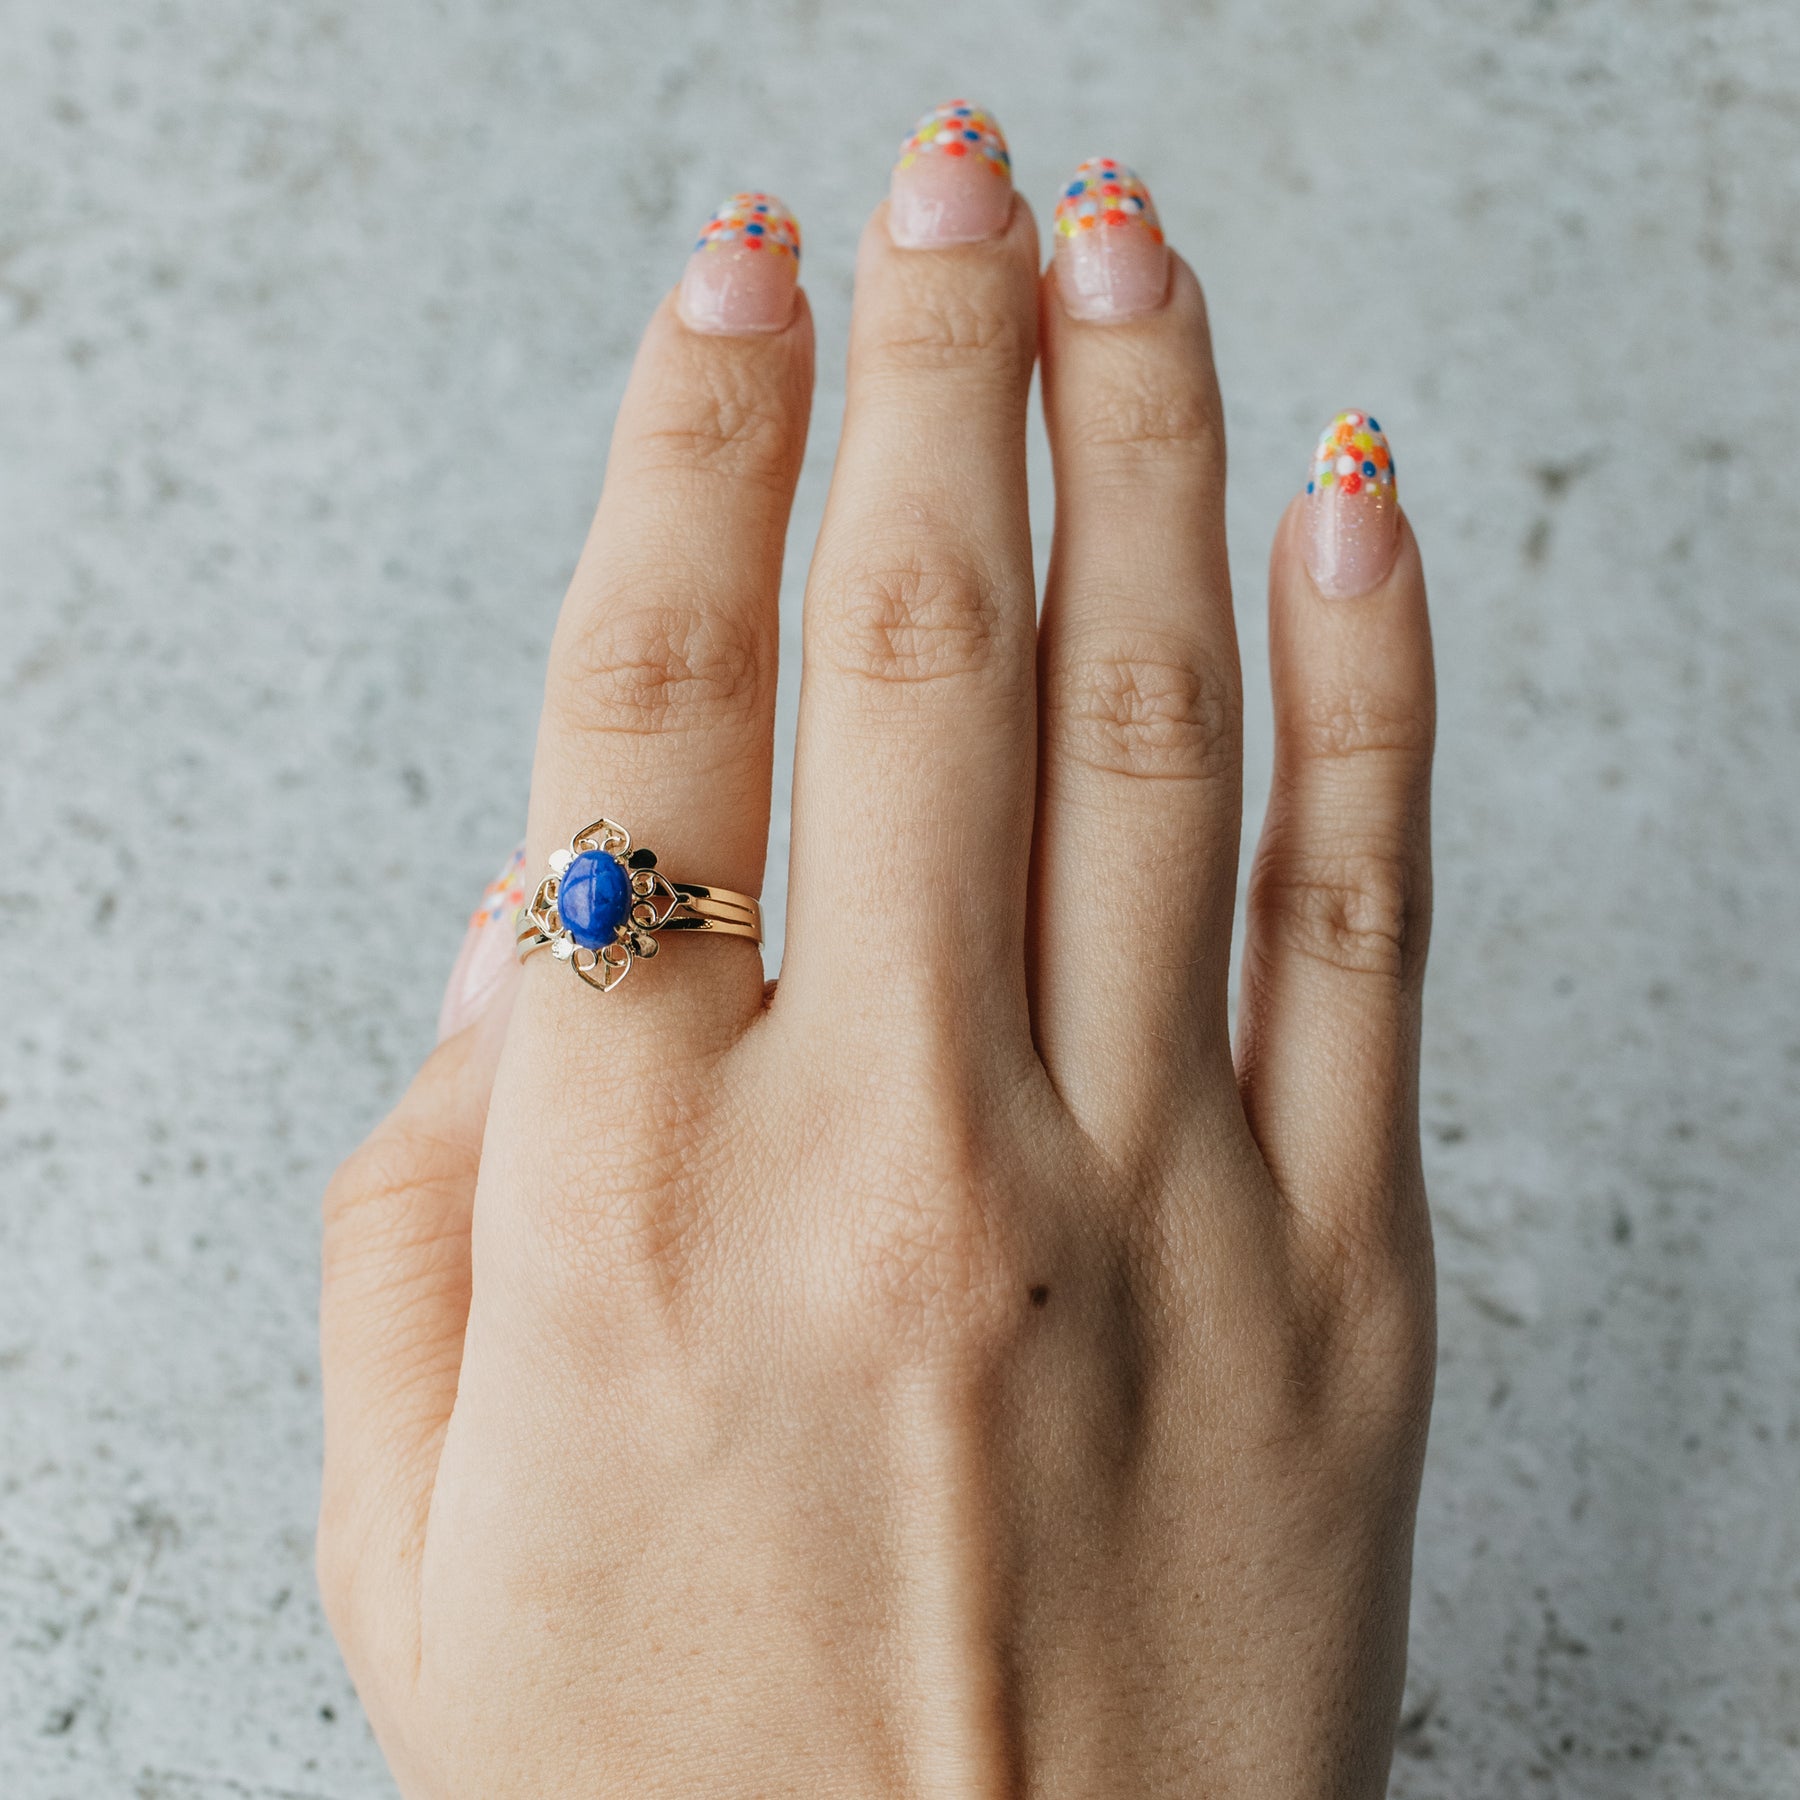 Solitaire Lapis Lazuli and Yellow Gold Ring